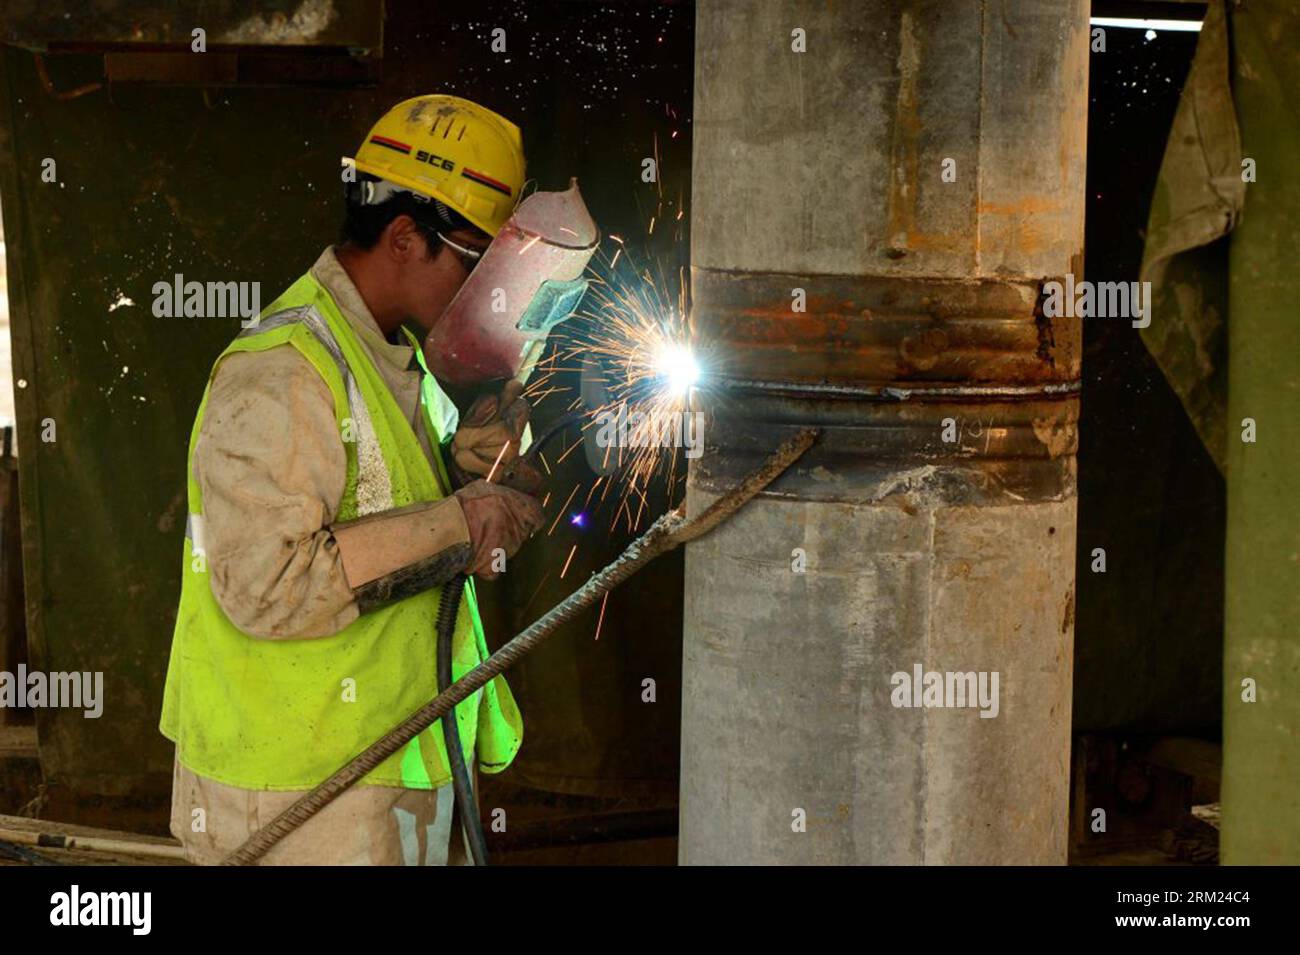 Bildnummer: 59689957  Datum: 24.05.2013  Copyright: imago/Xinhua (130524) -- SHANGHAI, May 24, 2013 (Xinhua) -- A welder works at the construction site to lay the foundations of a castle at the Shanghai Disney Resort in Shanghai, east China, May 24, 2013. Intended to open at the end of 2015, the resort will initially be comprised of Shanghai Disneyland, a Magic-Kingdom-style park as well as two themed hotels, a large retail, dining and entertainment venue, recreational facilities, a lake and transportation hubs. Covering an area of 1.16 square km, the theme park inside the 3.9-square-km Shangh Stock Photo